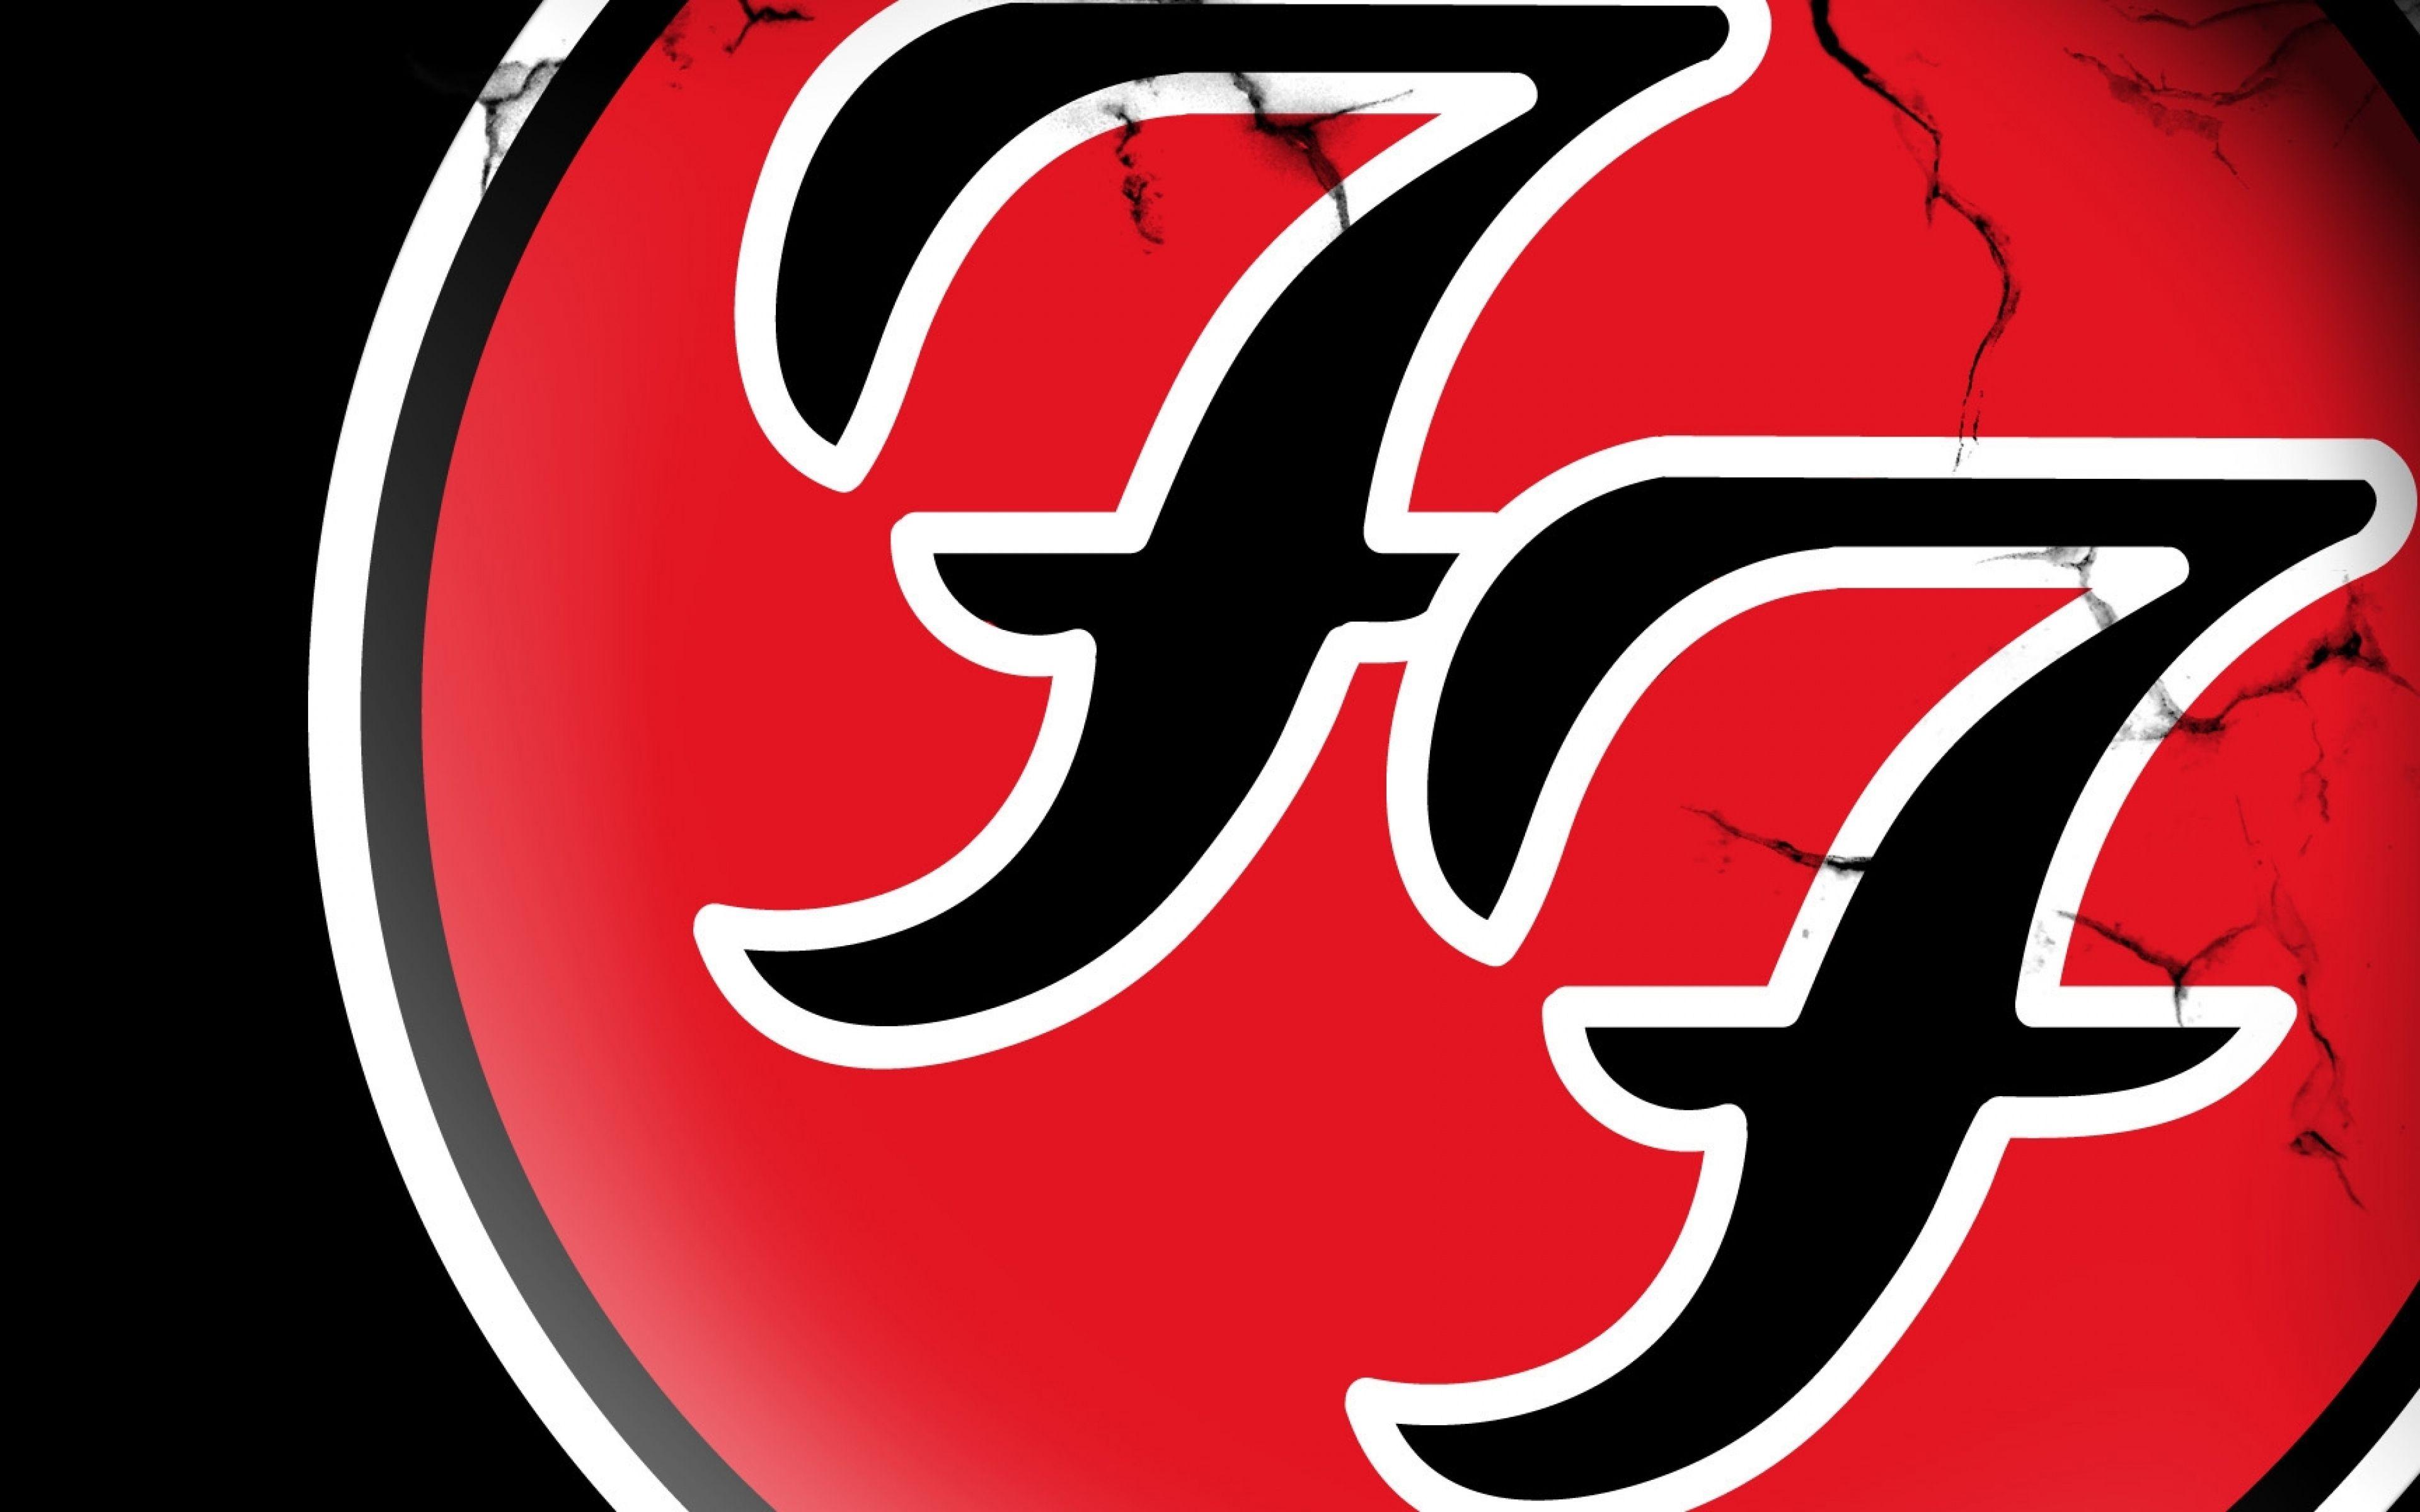 Foo Fighters Revisiting The Fighterss Defiant Debut Album